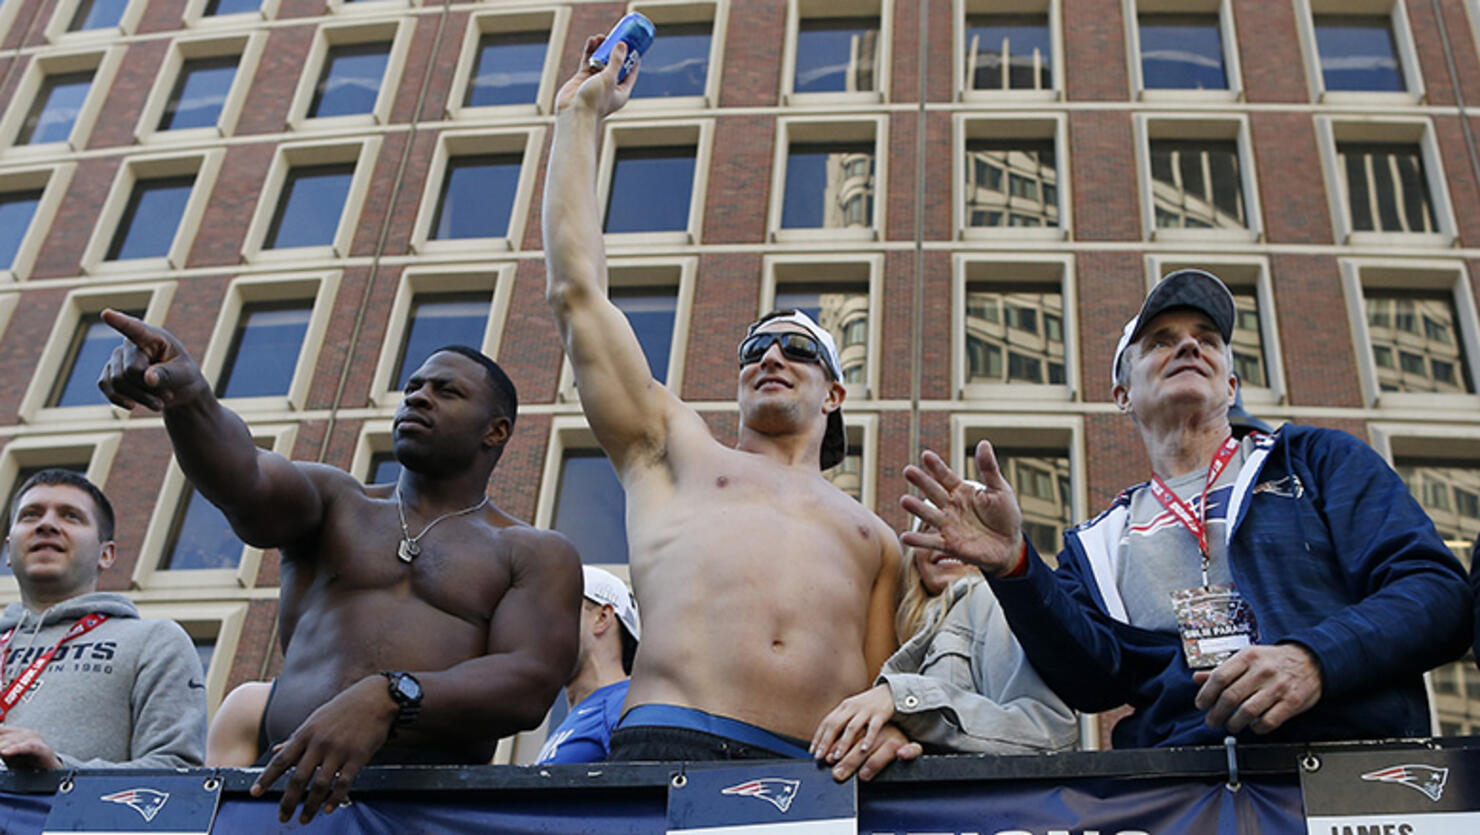 Rob Gronkowski, center, catches a beer that was thrown to him from the crowd during the New England Patriots Super Bowl LIII victory parade in Boston